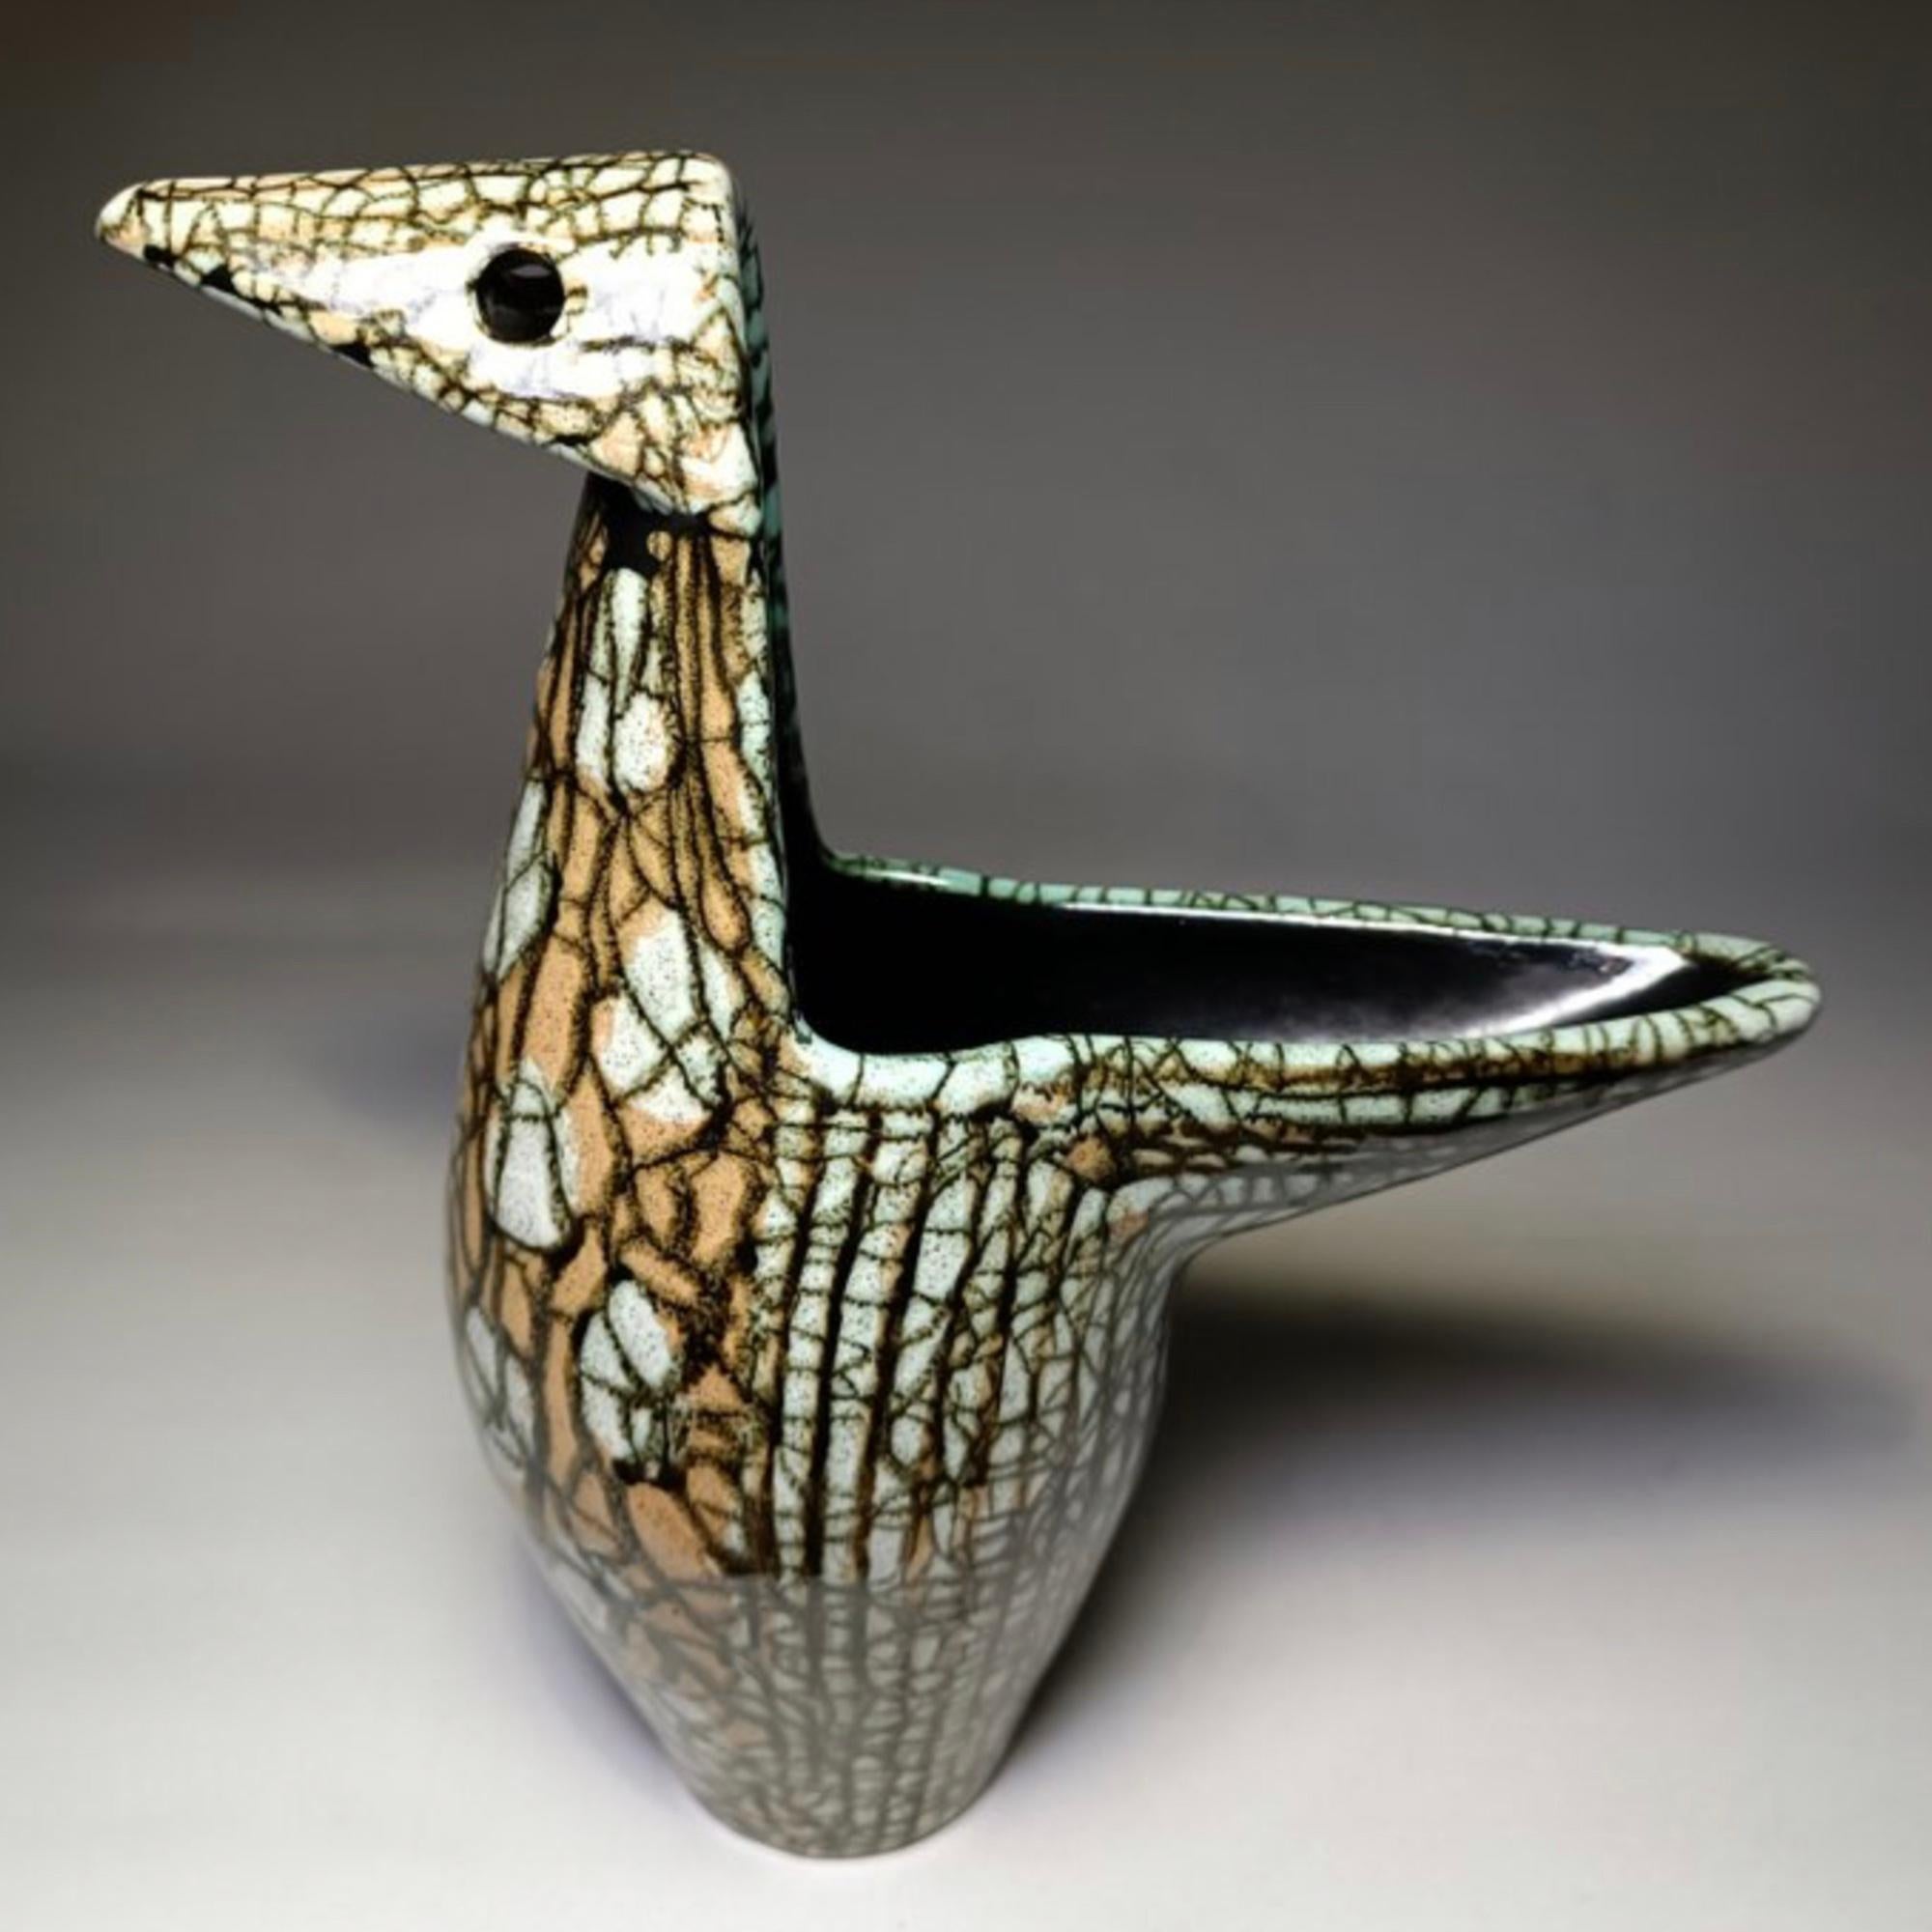 Hand-Crafted Vintage Bird Vase by Gorka Géza by Applied Arts Company 1959 Hungary For Sale